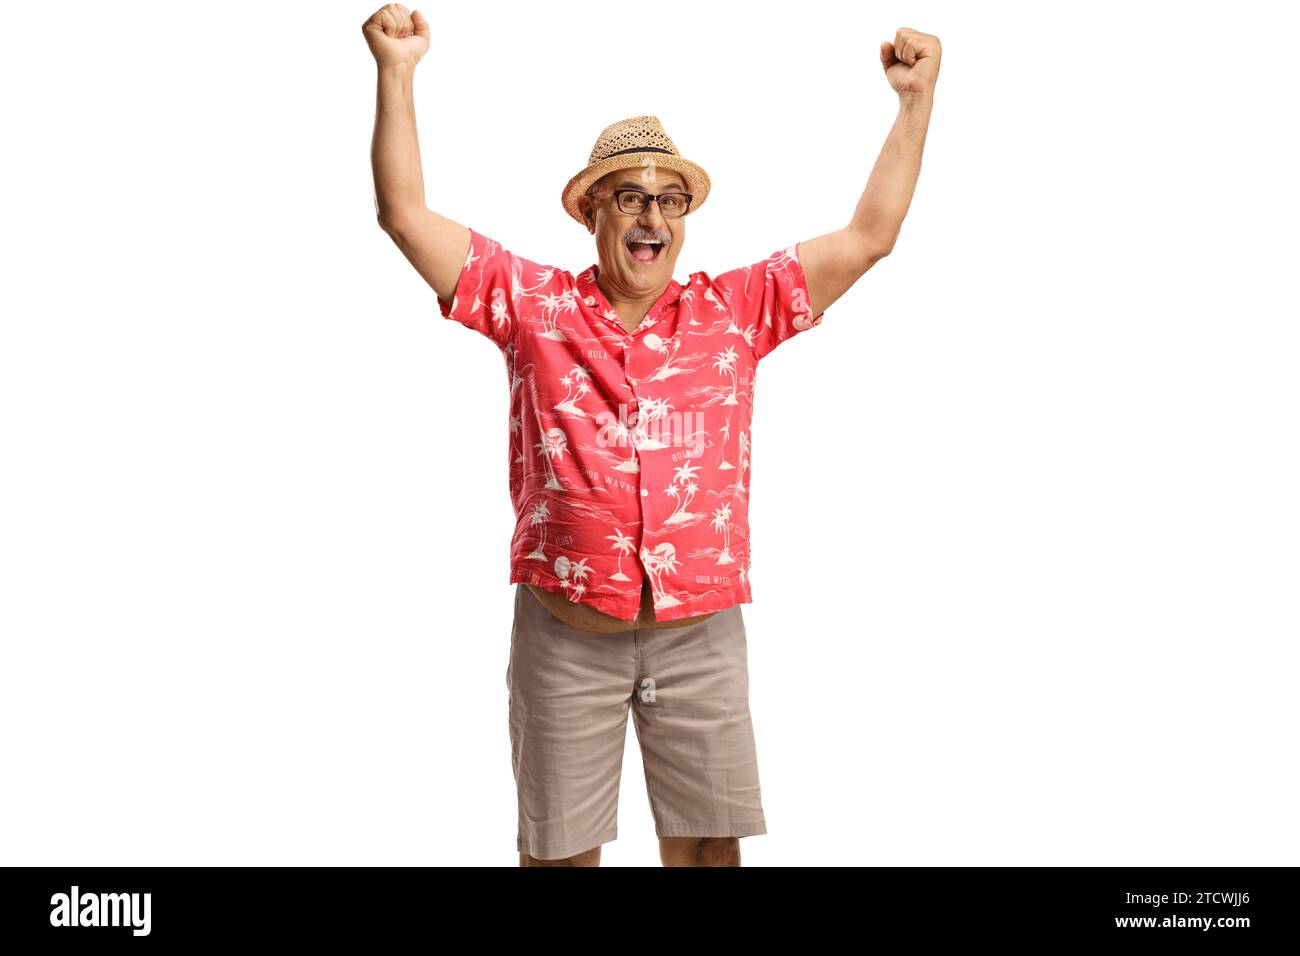 Overjoyed mature man gesturing happiness with arms up isolated on white background Stock Photo